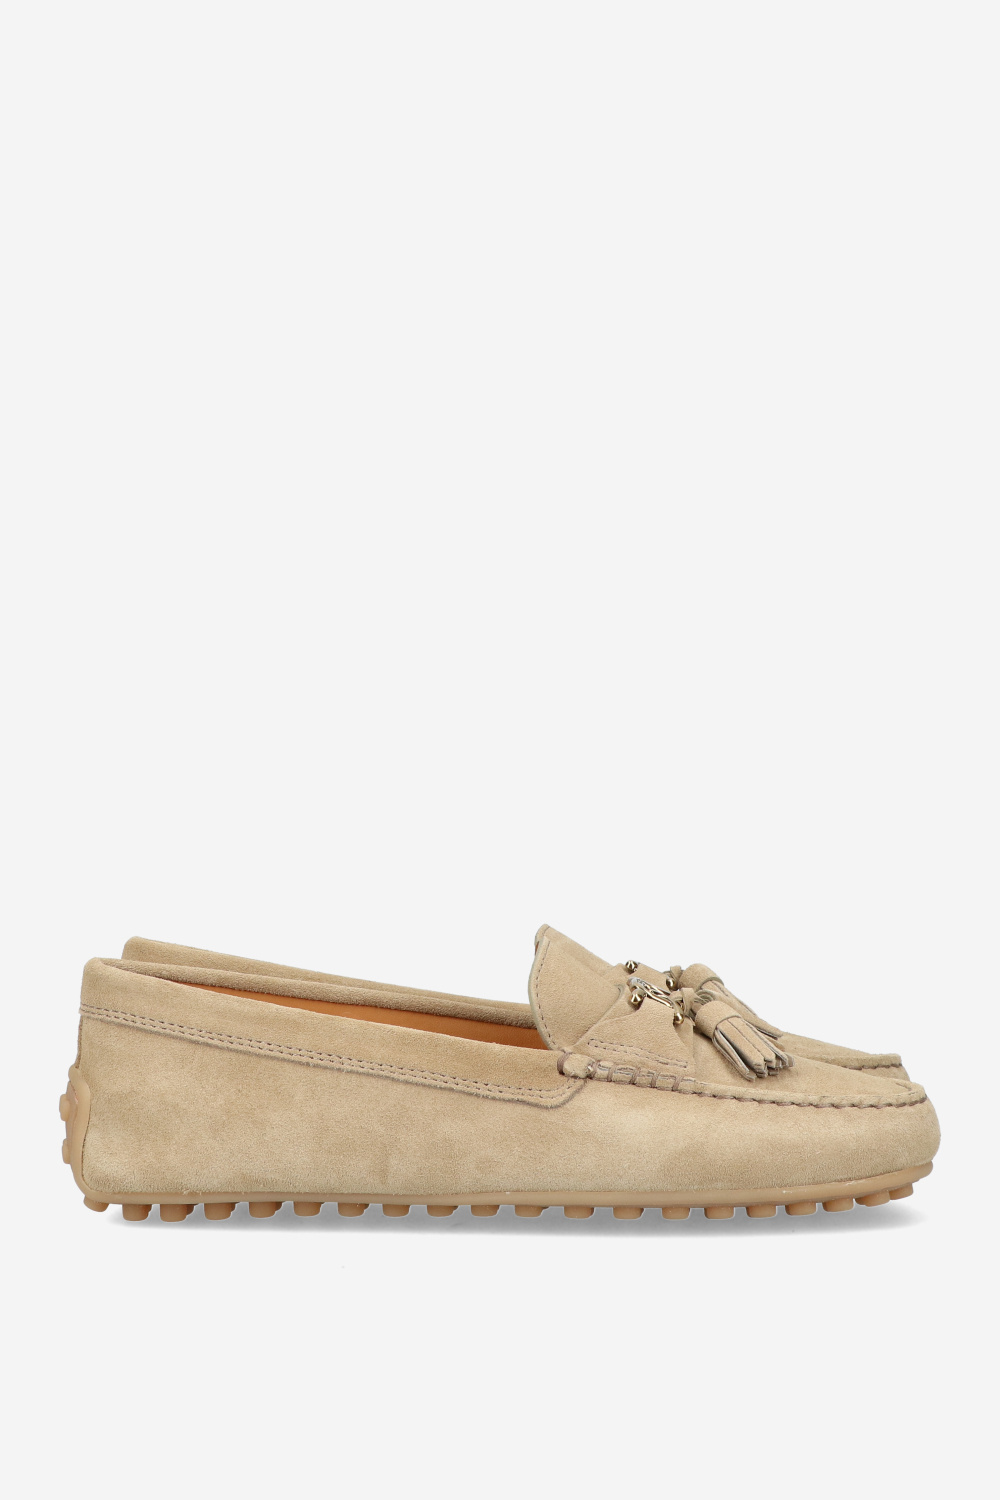 Tods Loafers Beige